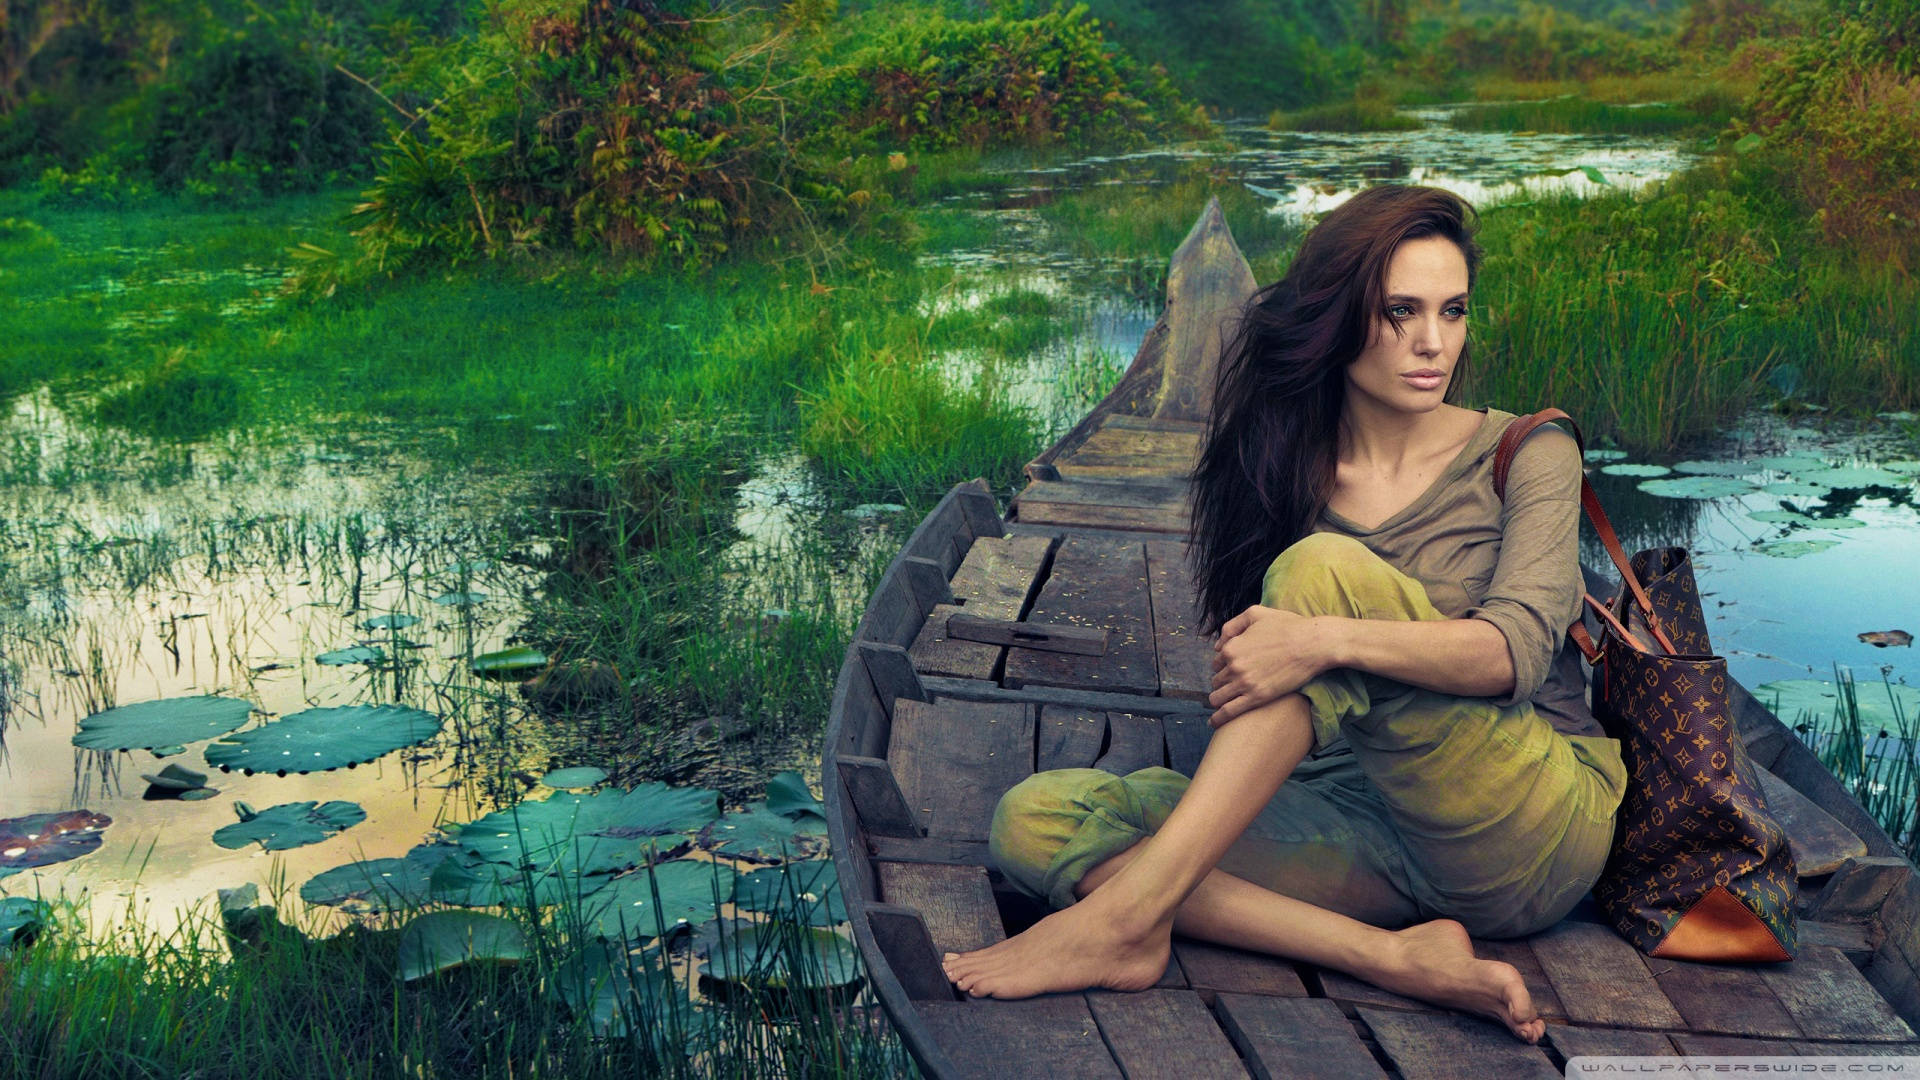 Angelina Jolie Riding A Boat Background